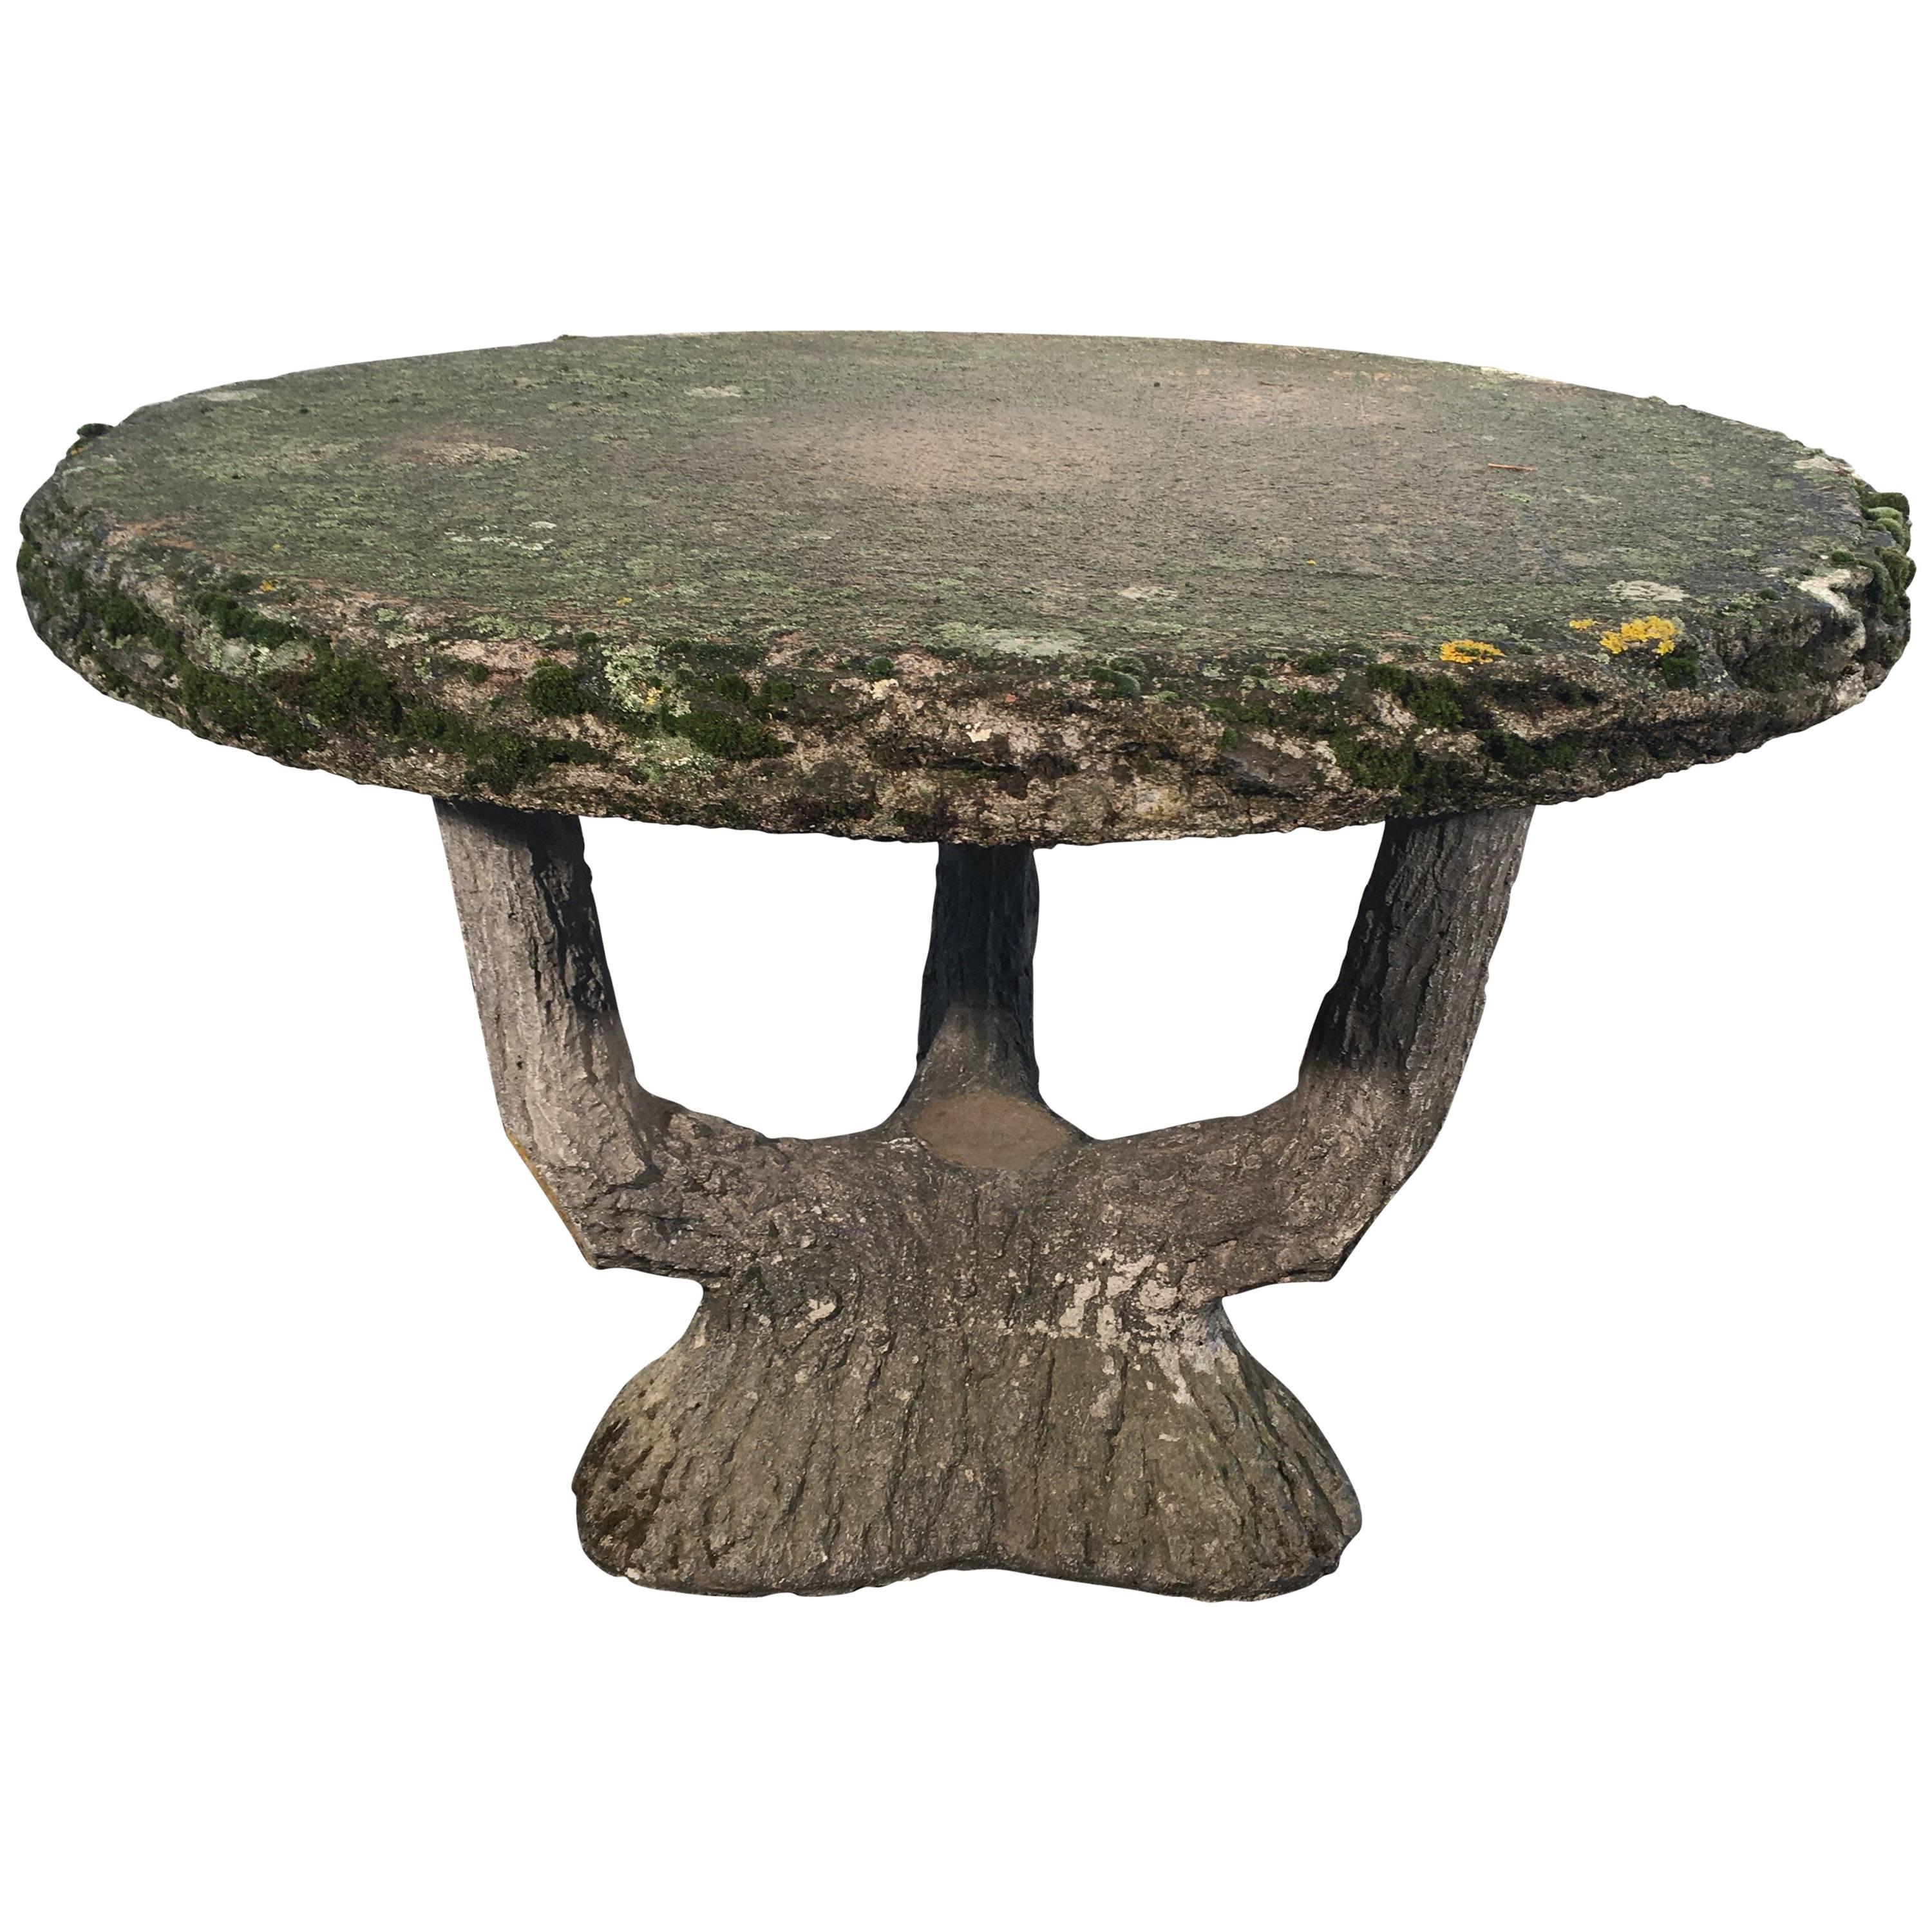 Mossy French Round Faux Bois Dining Table For Sale